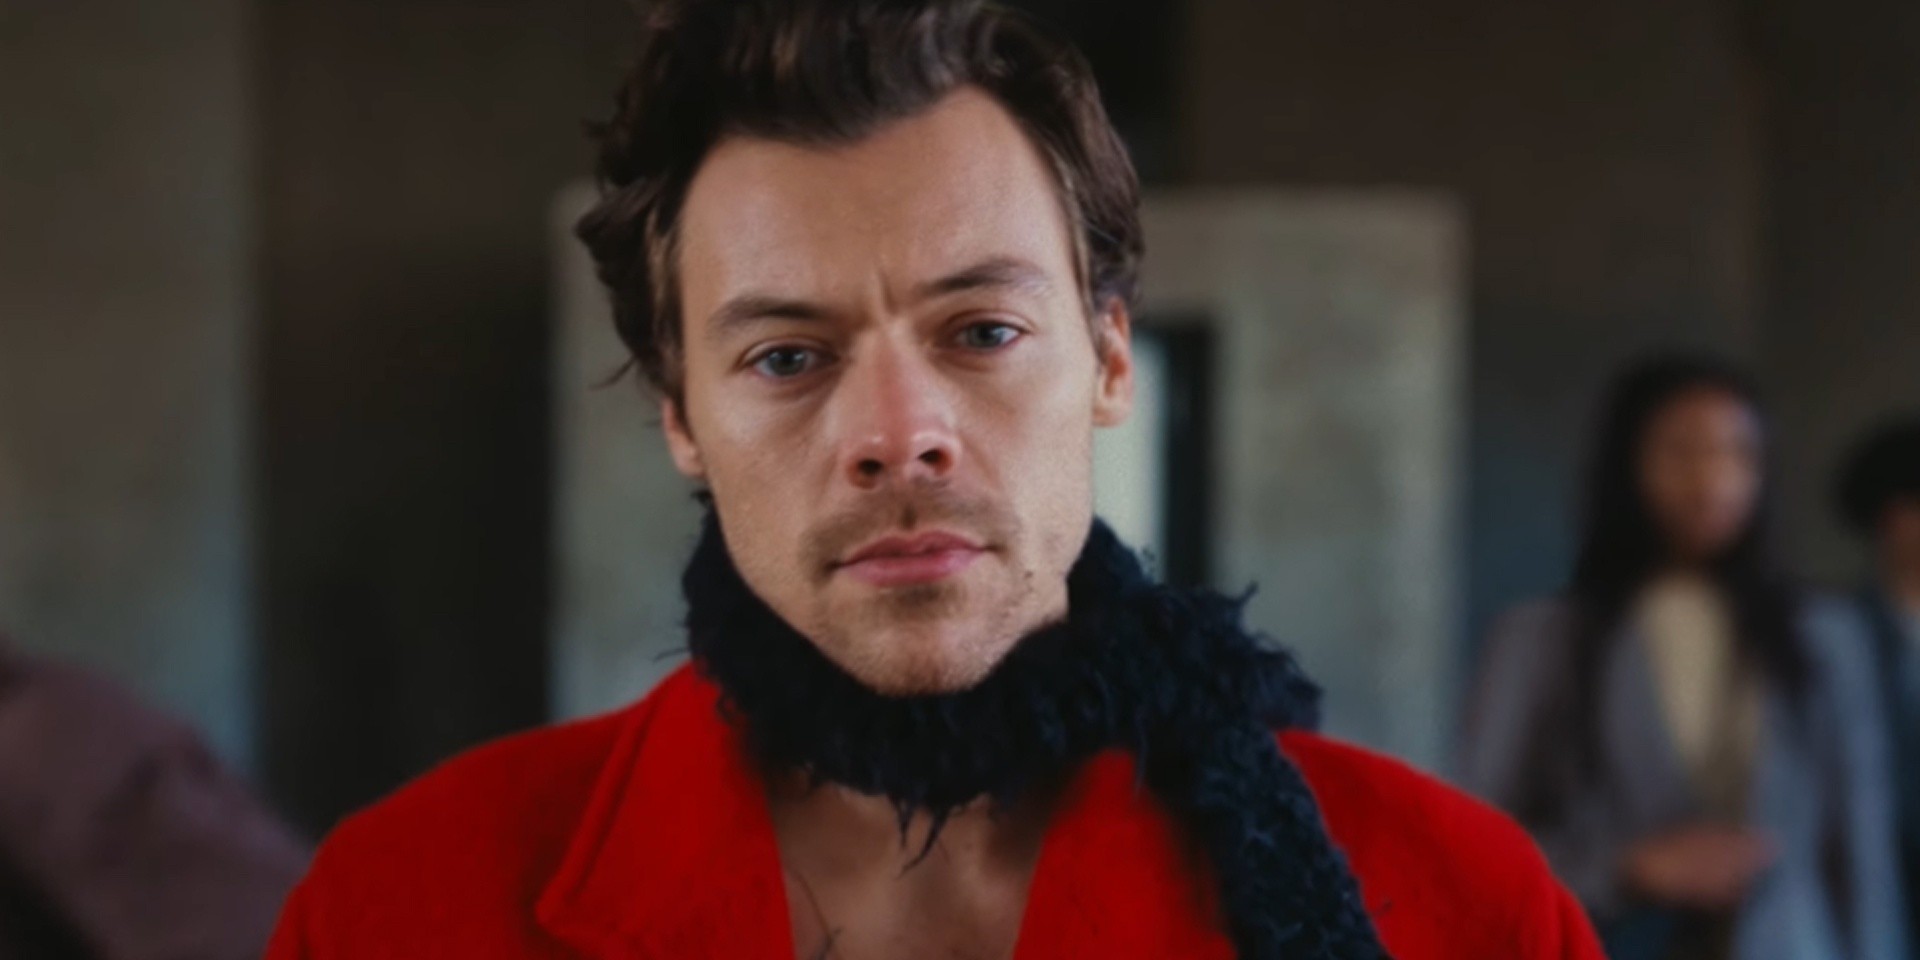 Harry Styles gets vulnerable in new 'As It Was' video from his upcoming album 'Harry's House' – watch